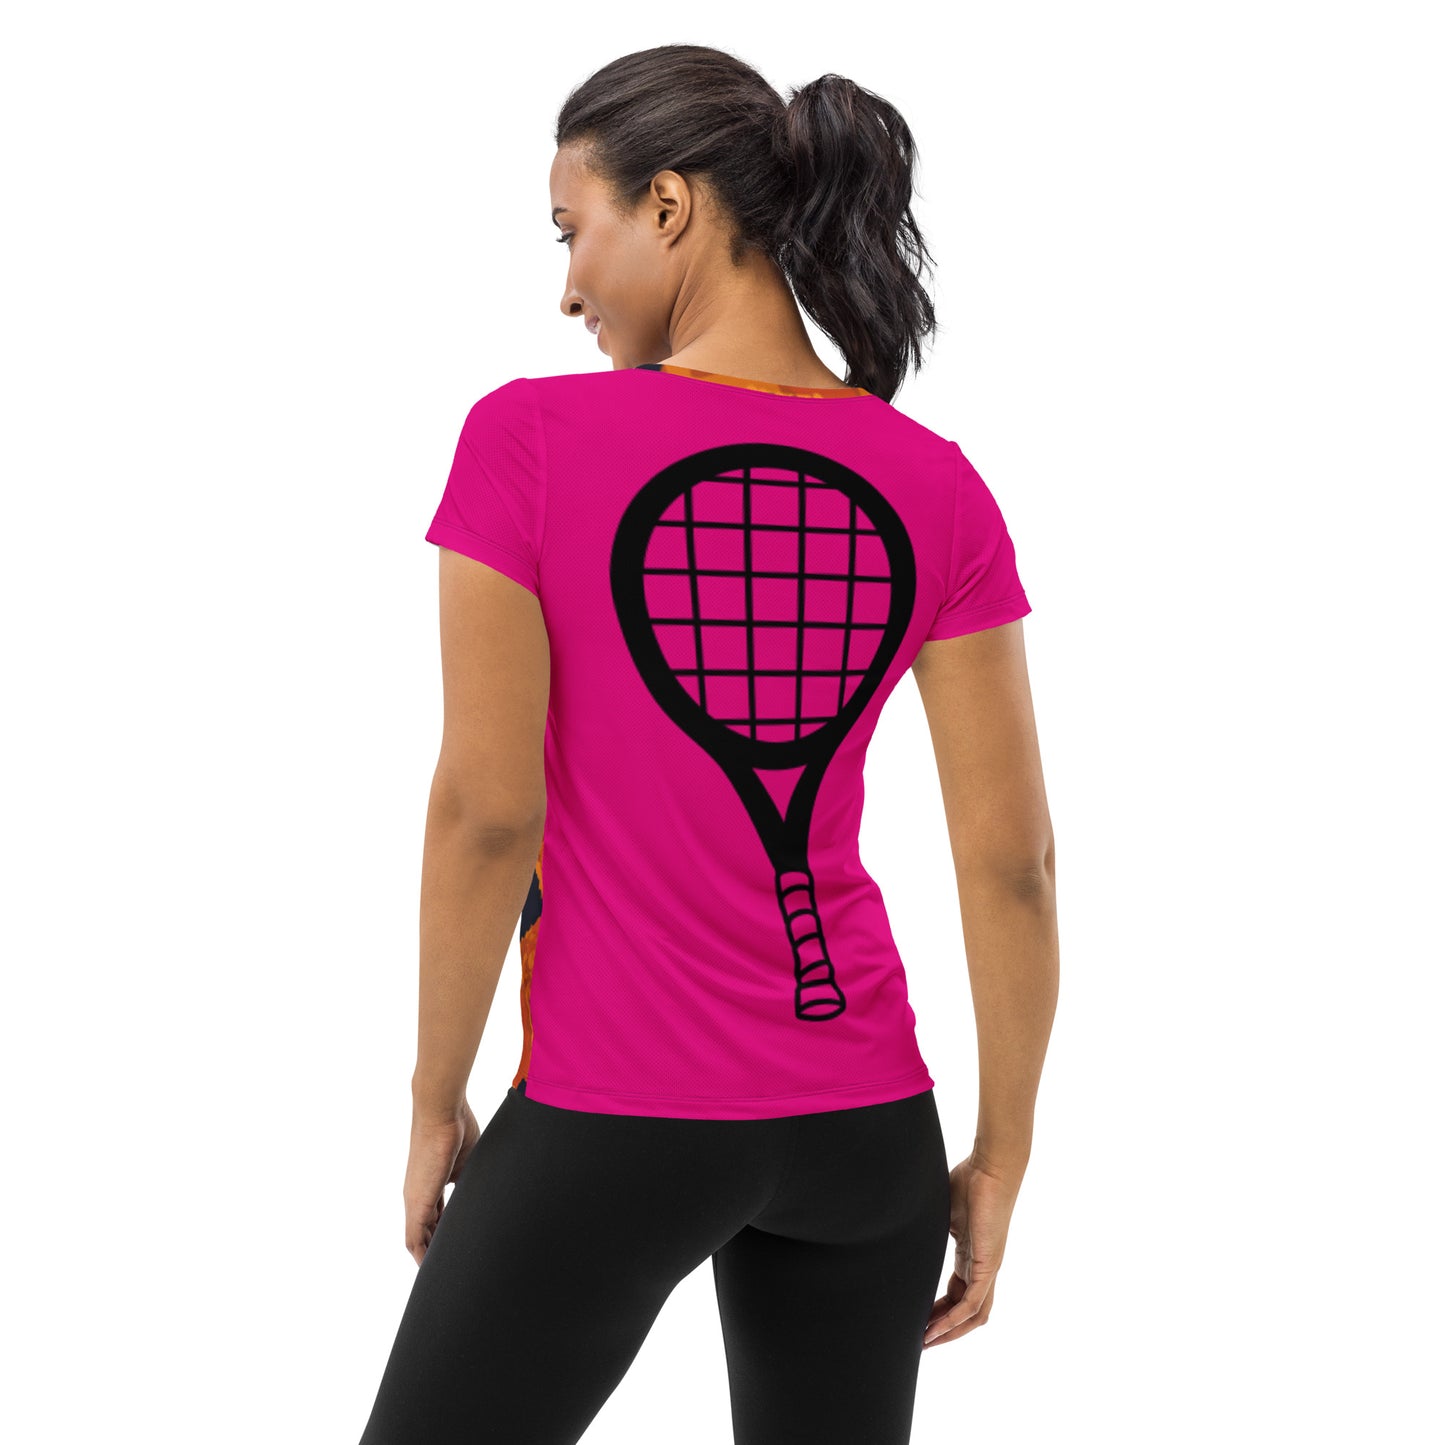 Athletic Top for Tennis or Pickle Ball - DMD Bags